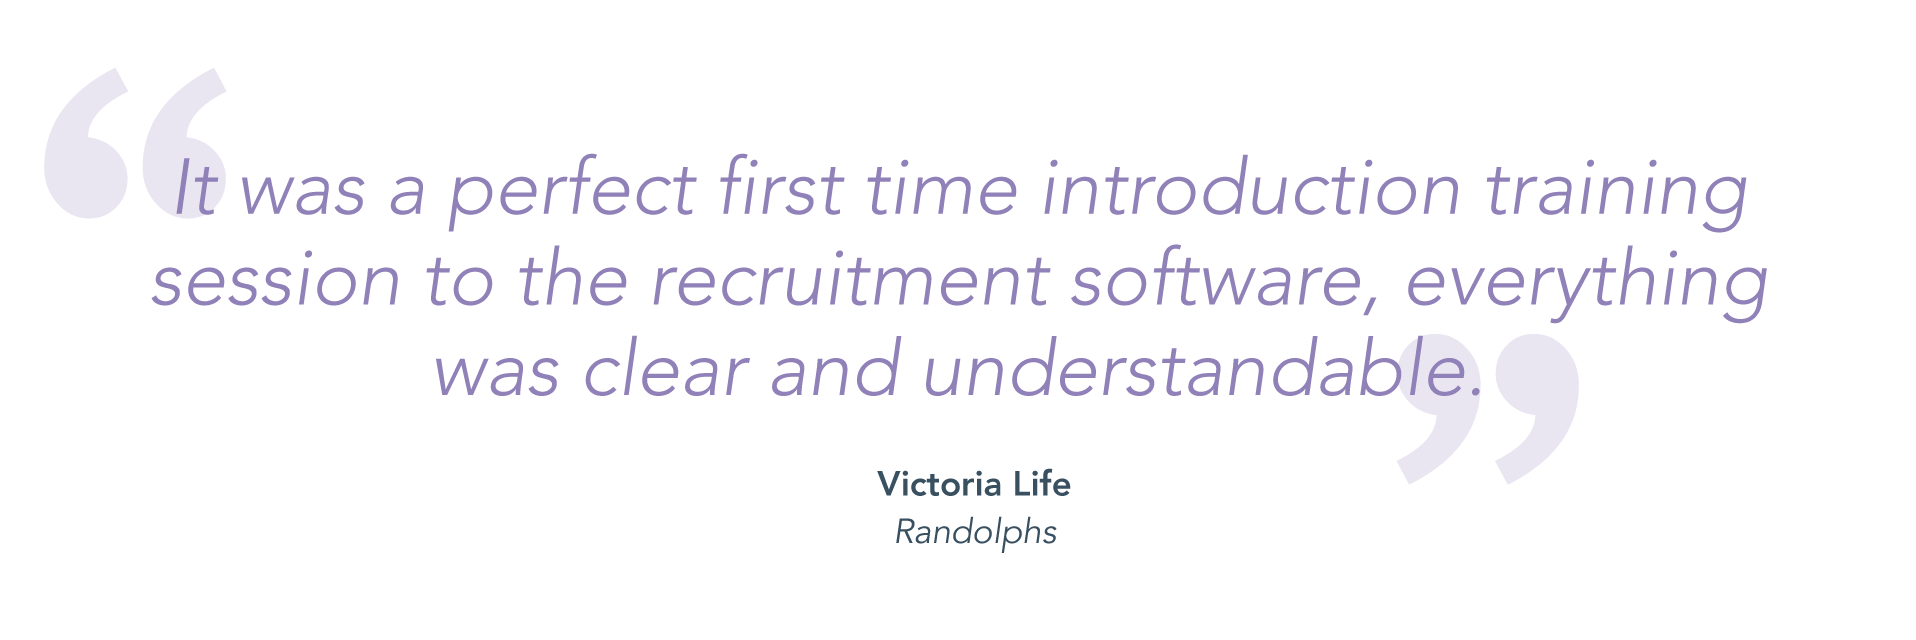 "It was a perfect first time introduction training session to the recruitment software, everything was clear and understandable." - Victoria Life, Randolphs.